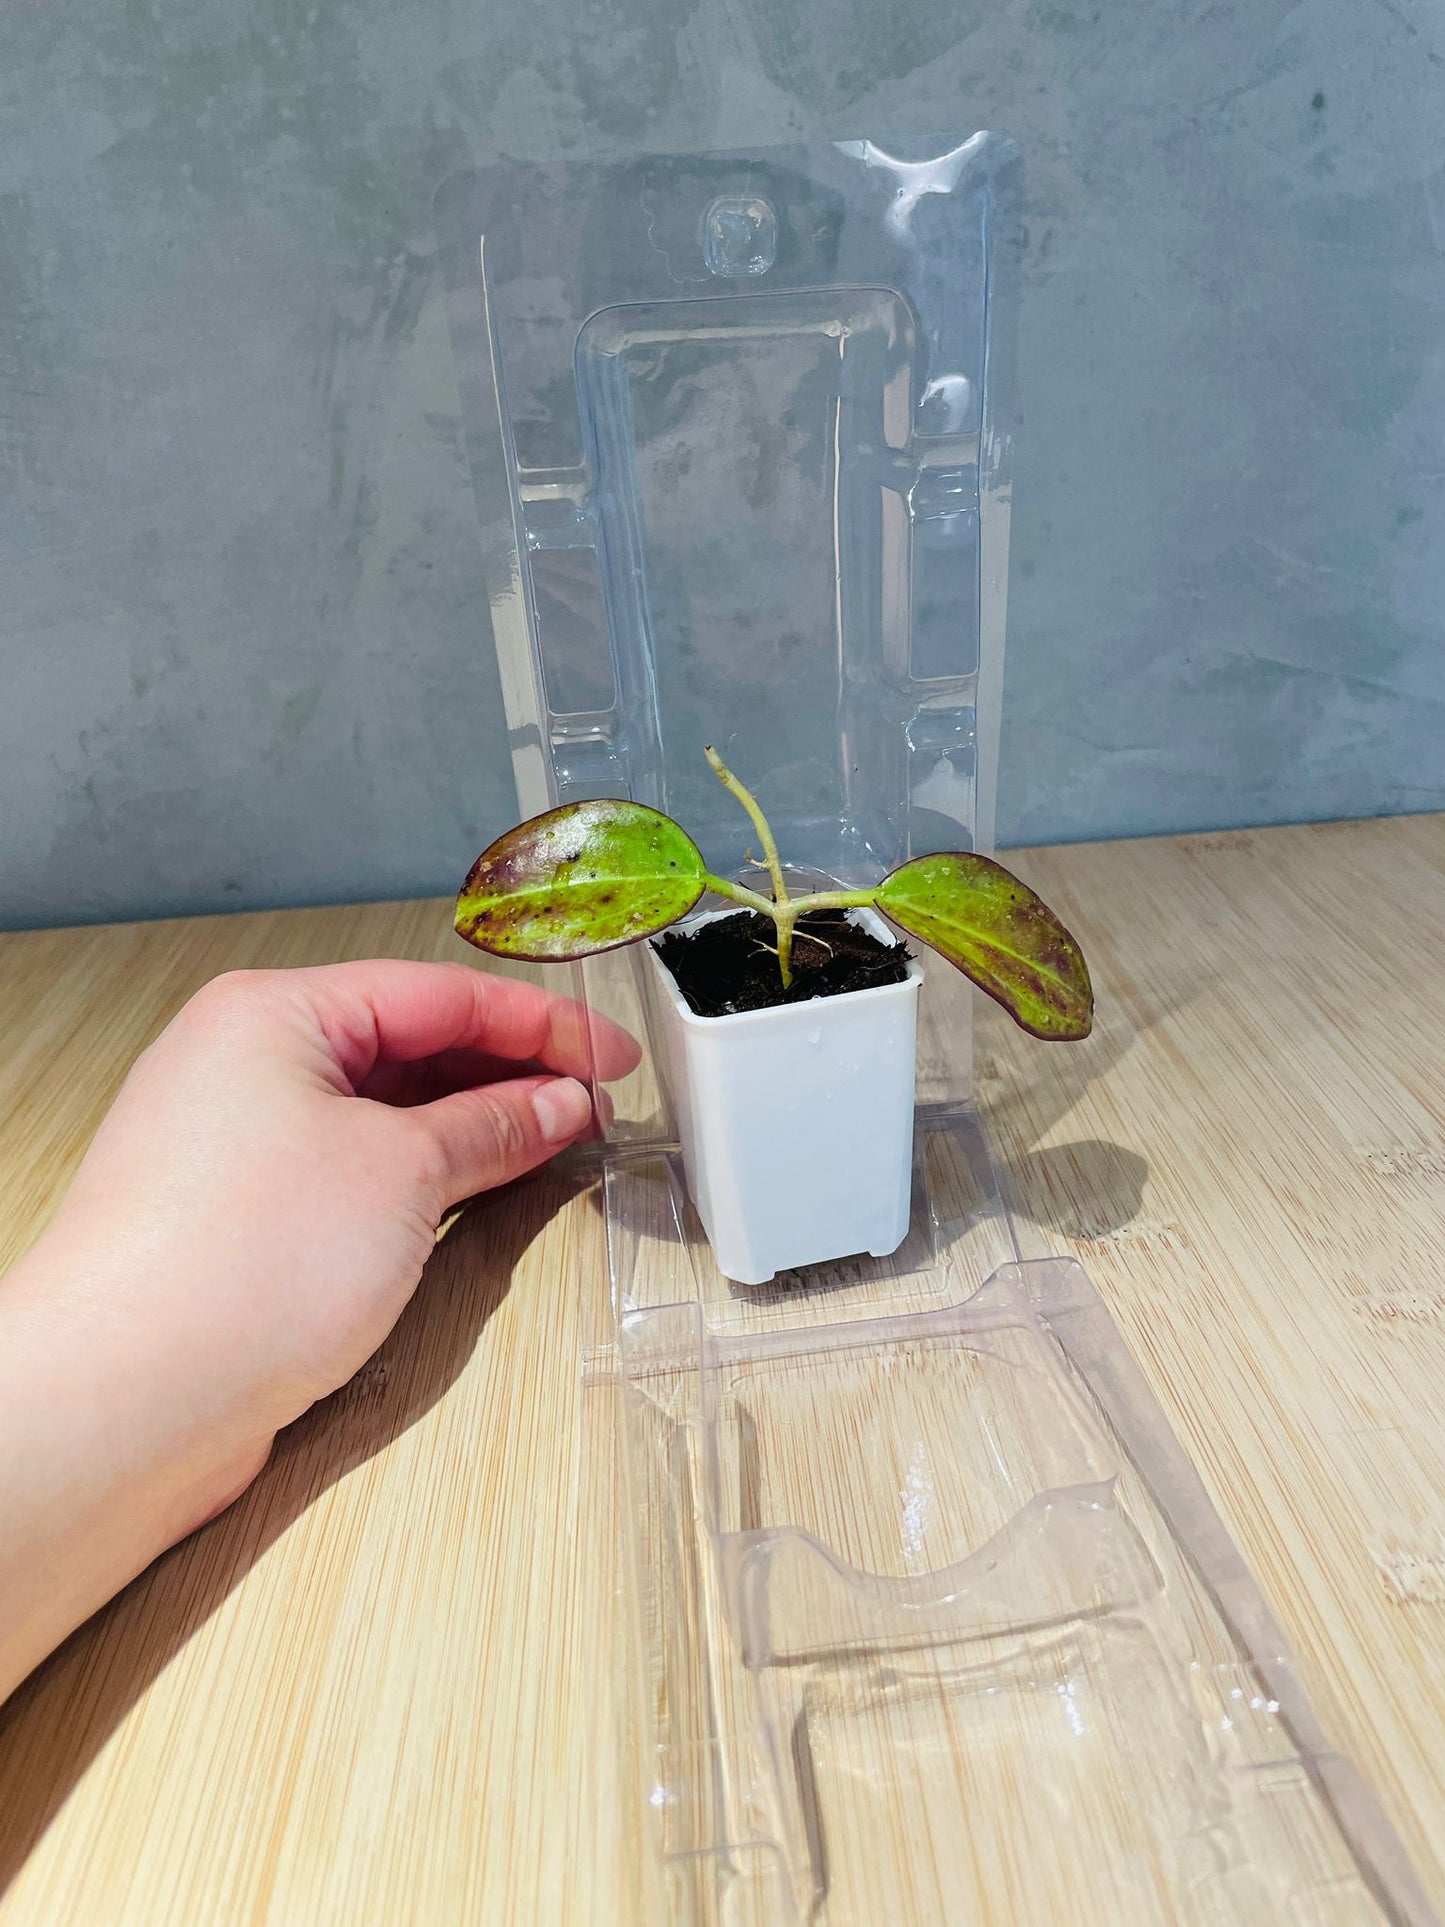 Plant Packaging